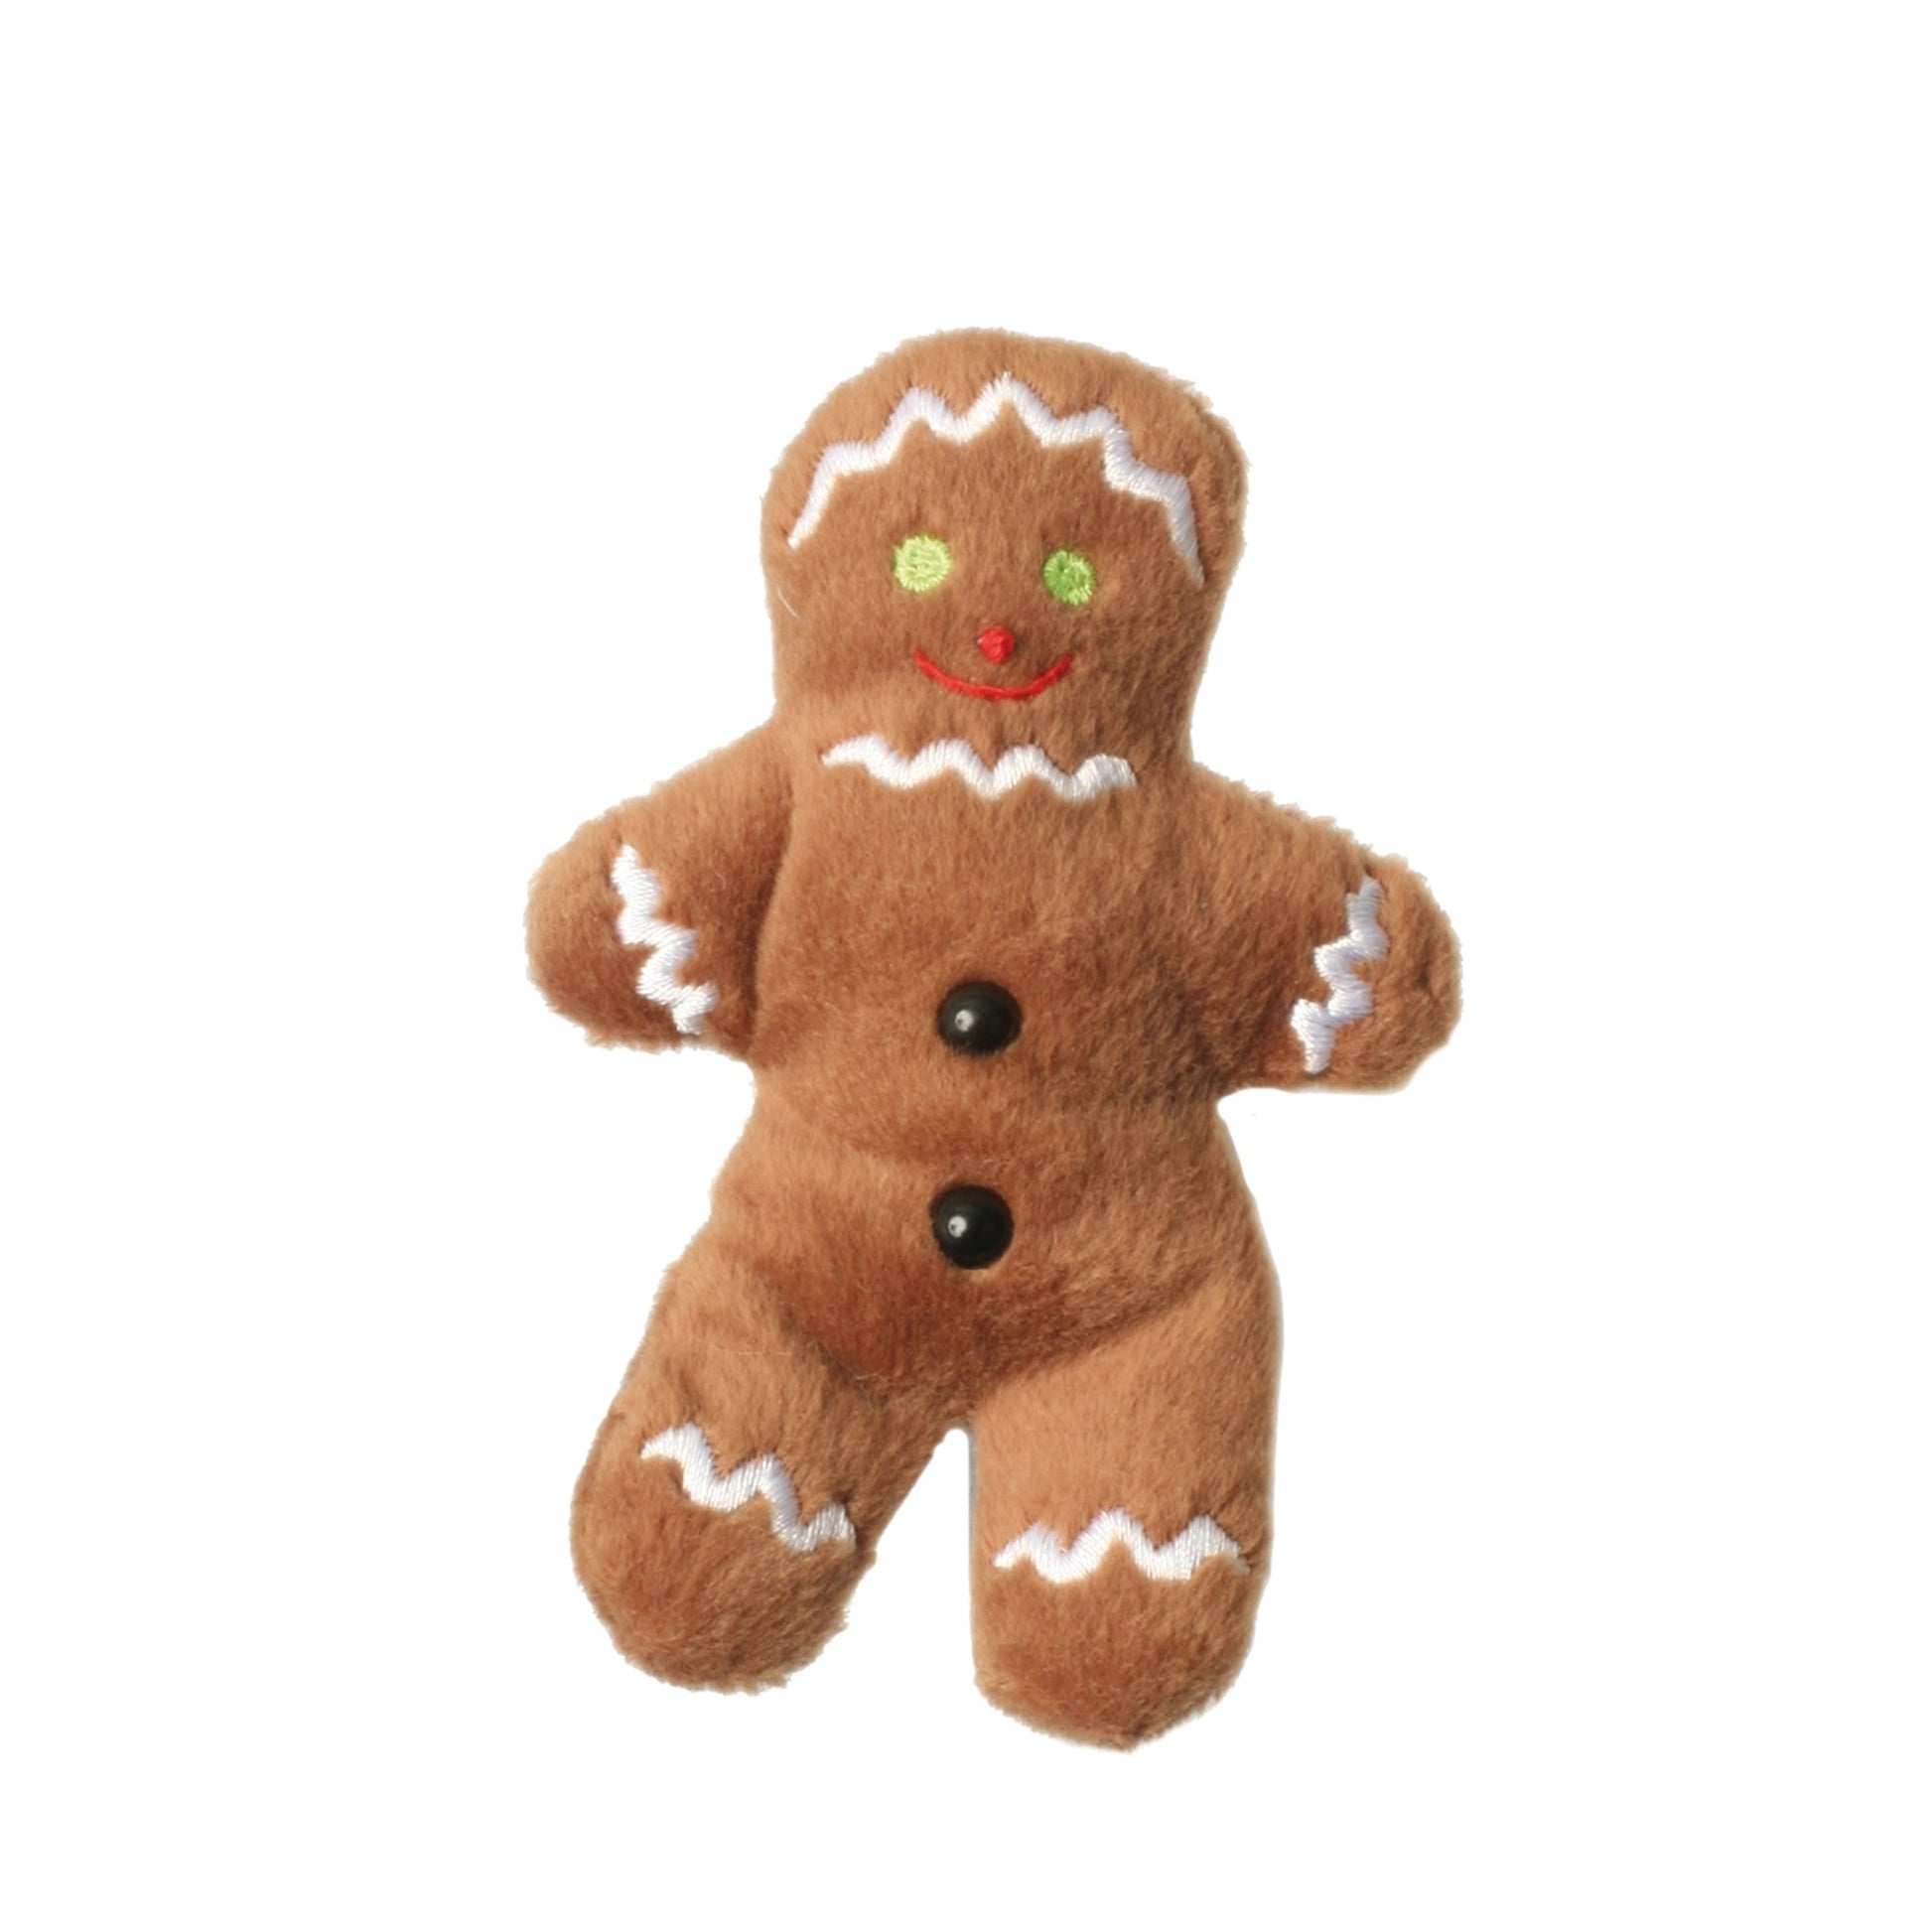 Gingerbread Man Finger Puppet - The Puppet Company - The Forgotten Toy Shop